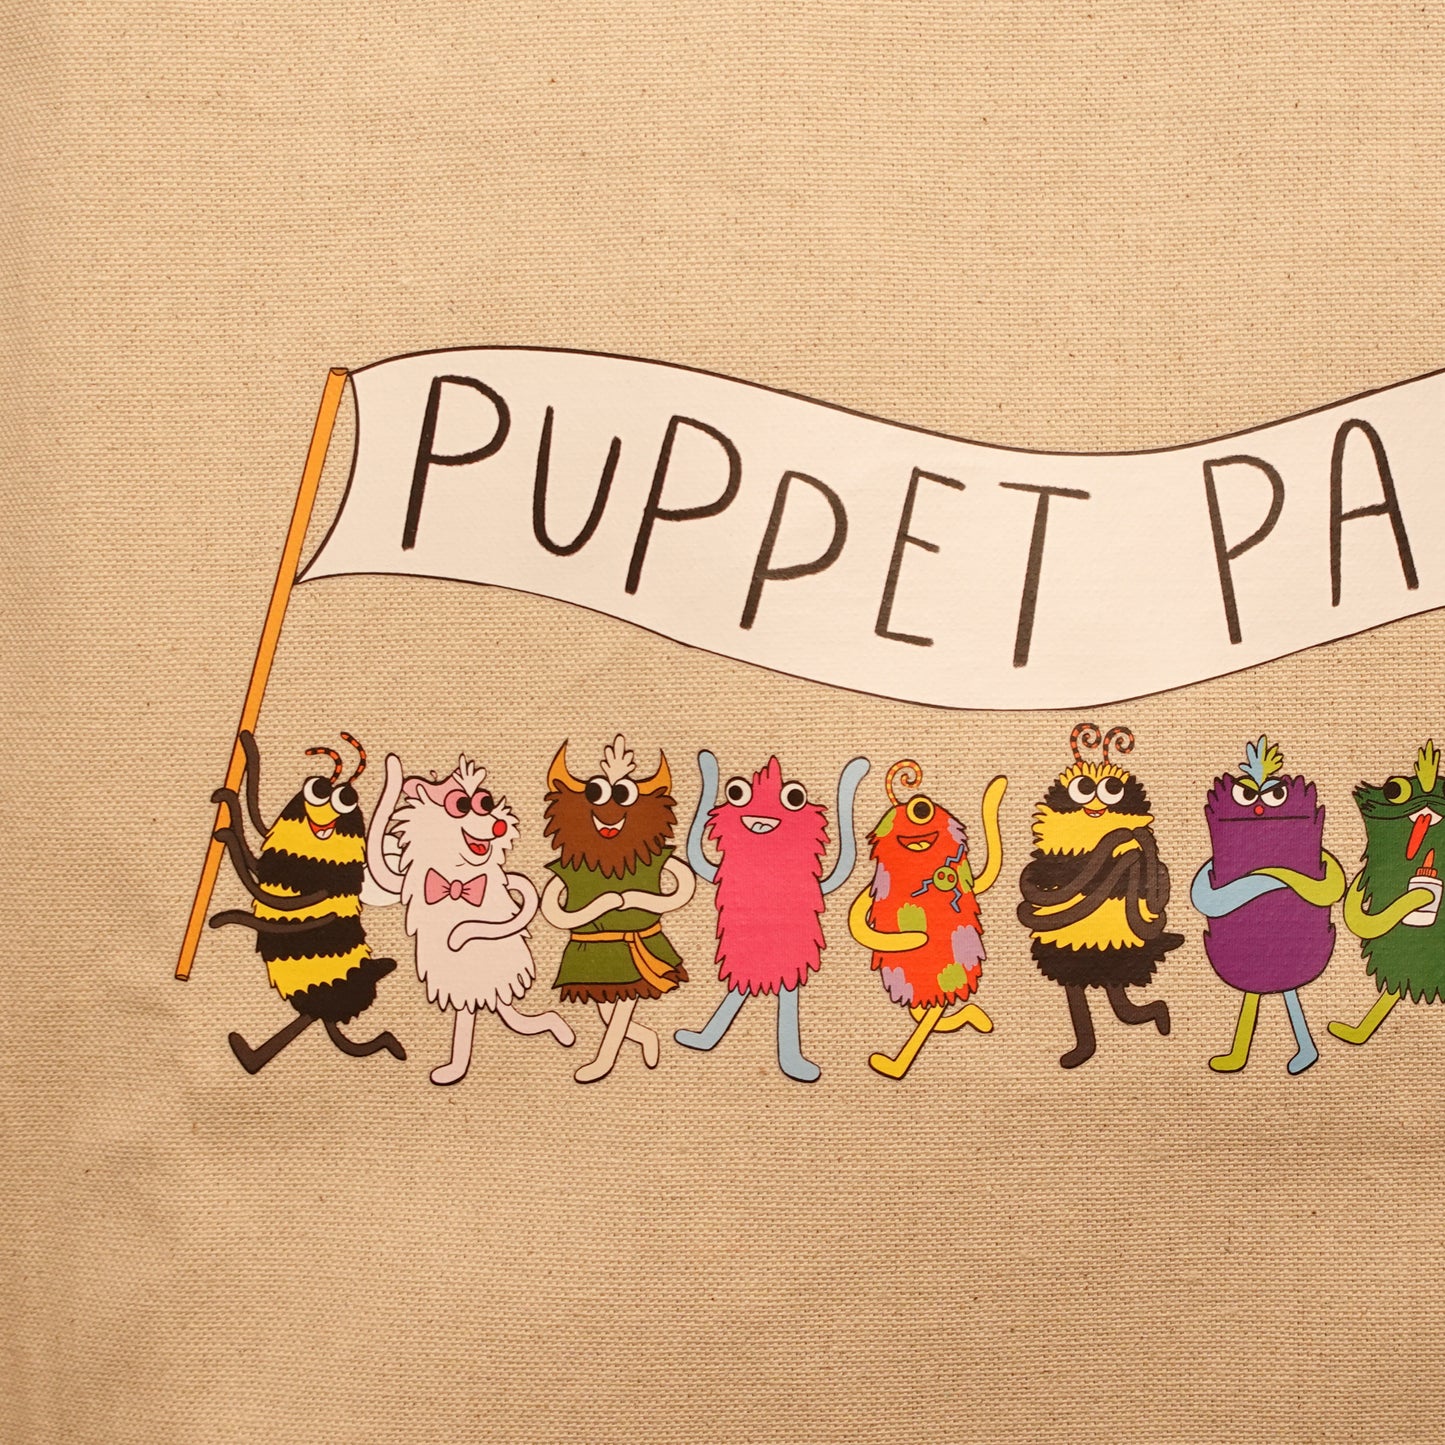 Puppet Parade Tote